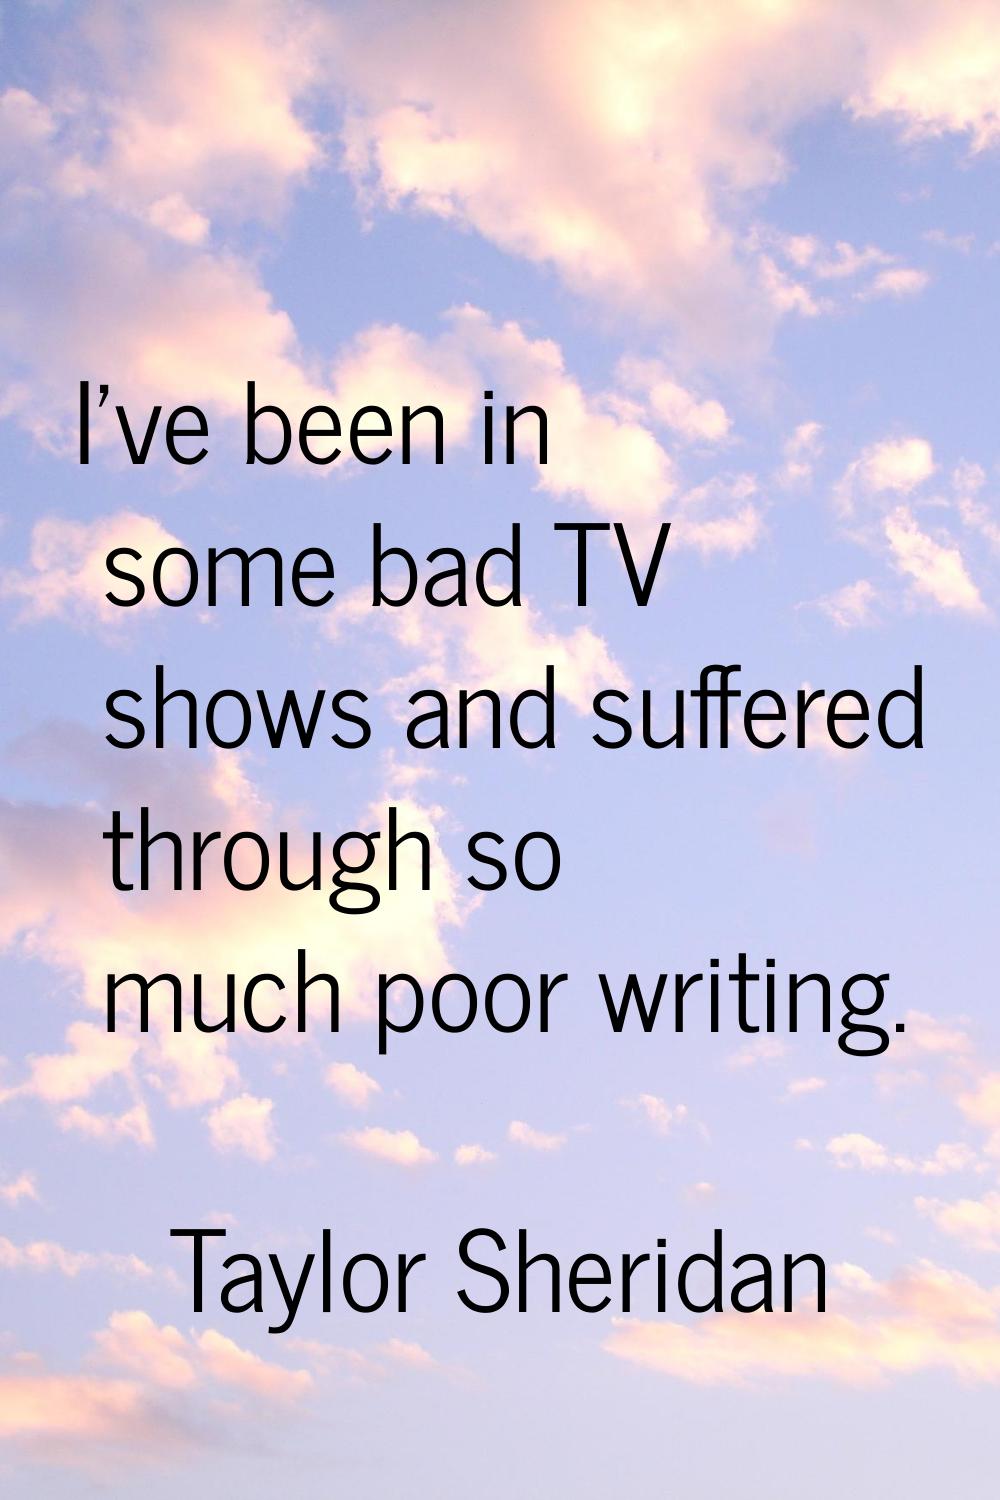 I've been in some bad TV shows and suffered through so much poor writing.